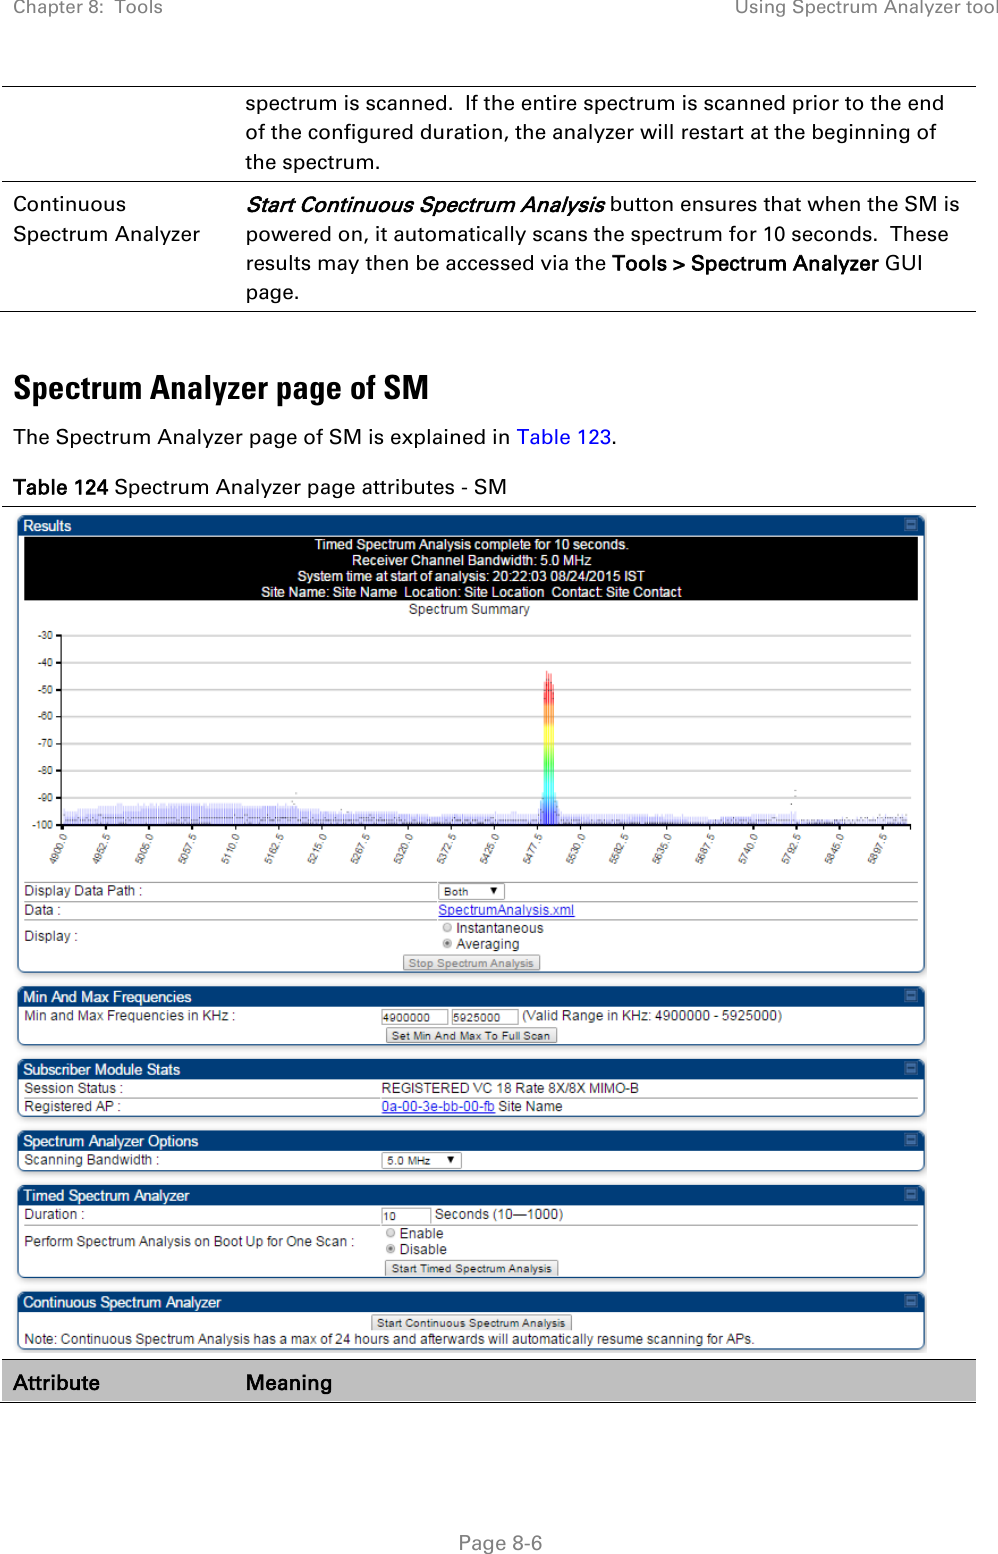 Chapter 8:  Tools Using Spectrum Analyzer tool   Page 8-6 spectrum is scanned.  If the entire spectrum is scanned prior to the end of the configured duration, the analyzer will restart at the beginning of the spectrum. Continuous Spectrum Analyzer  Start Continuous Spectrum Analysis button ensures that when the SM is powered on, it automatically scans the spectrum for 10 seconds.  These results may then be accessed via the Tools &gt; Spectrum Analyzer GUI page.  Spectrum Analyzer page of SM The Spectrum Analyzer page of SM is explained in Table 123. Table 124 Spectrum Analyzer page attributes - SM  Attribute Meaning 